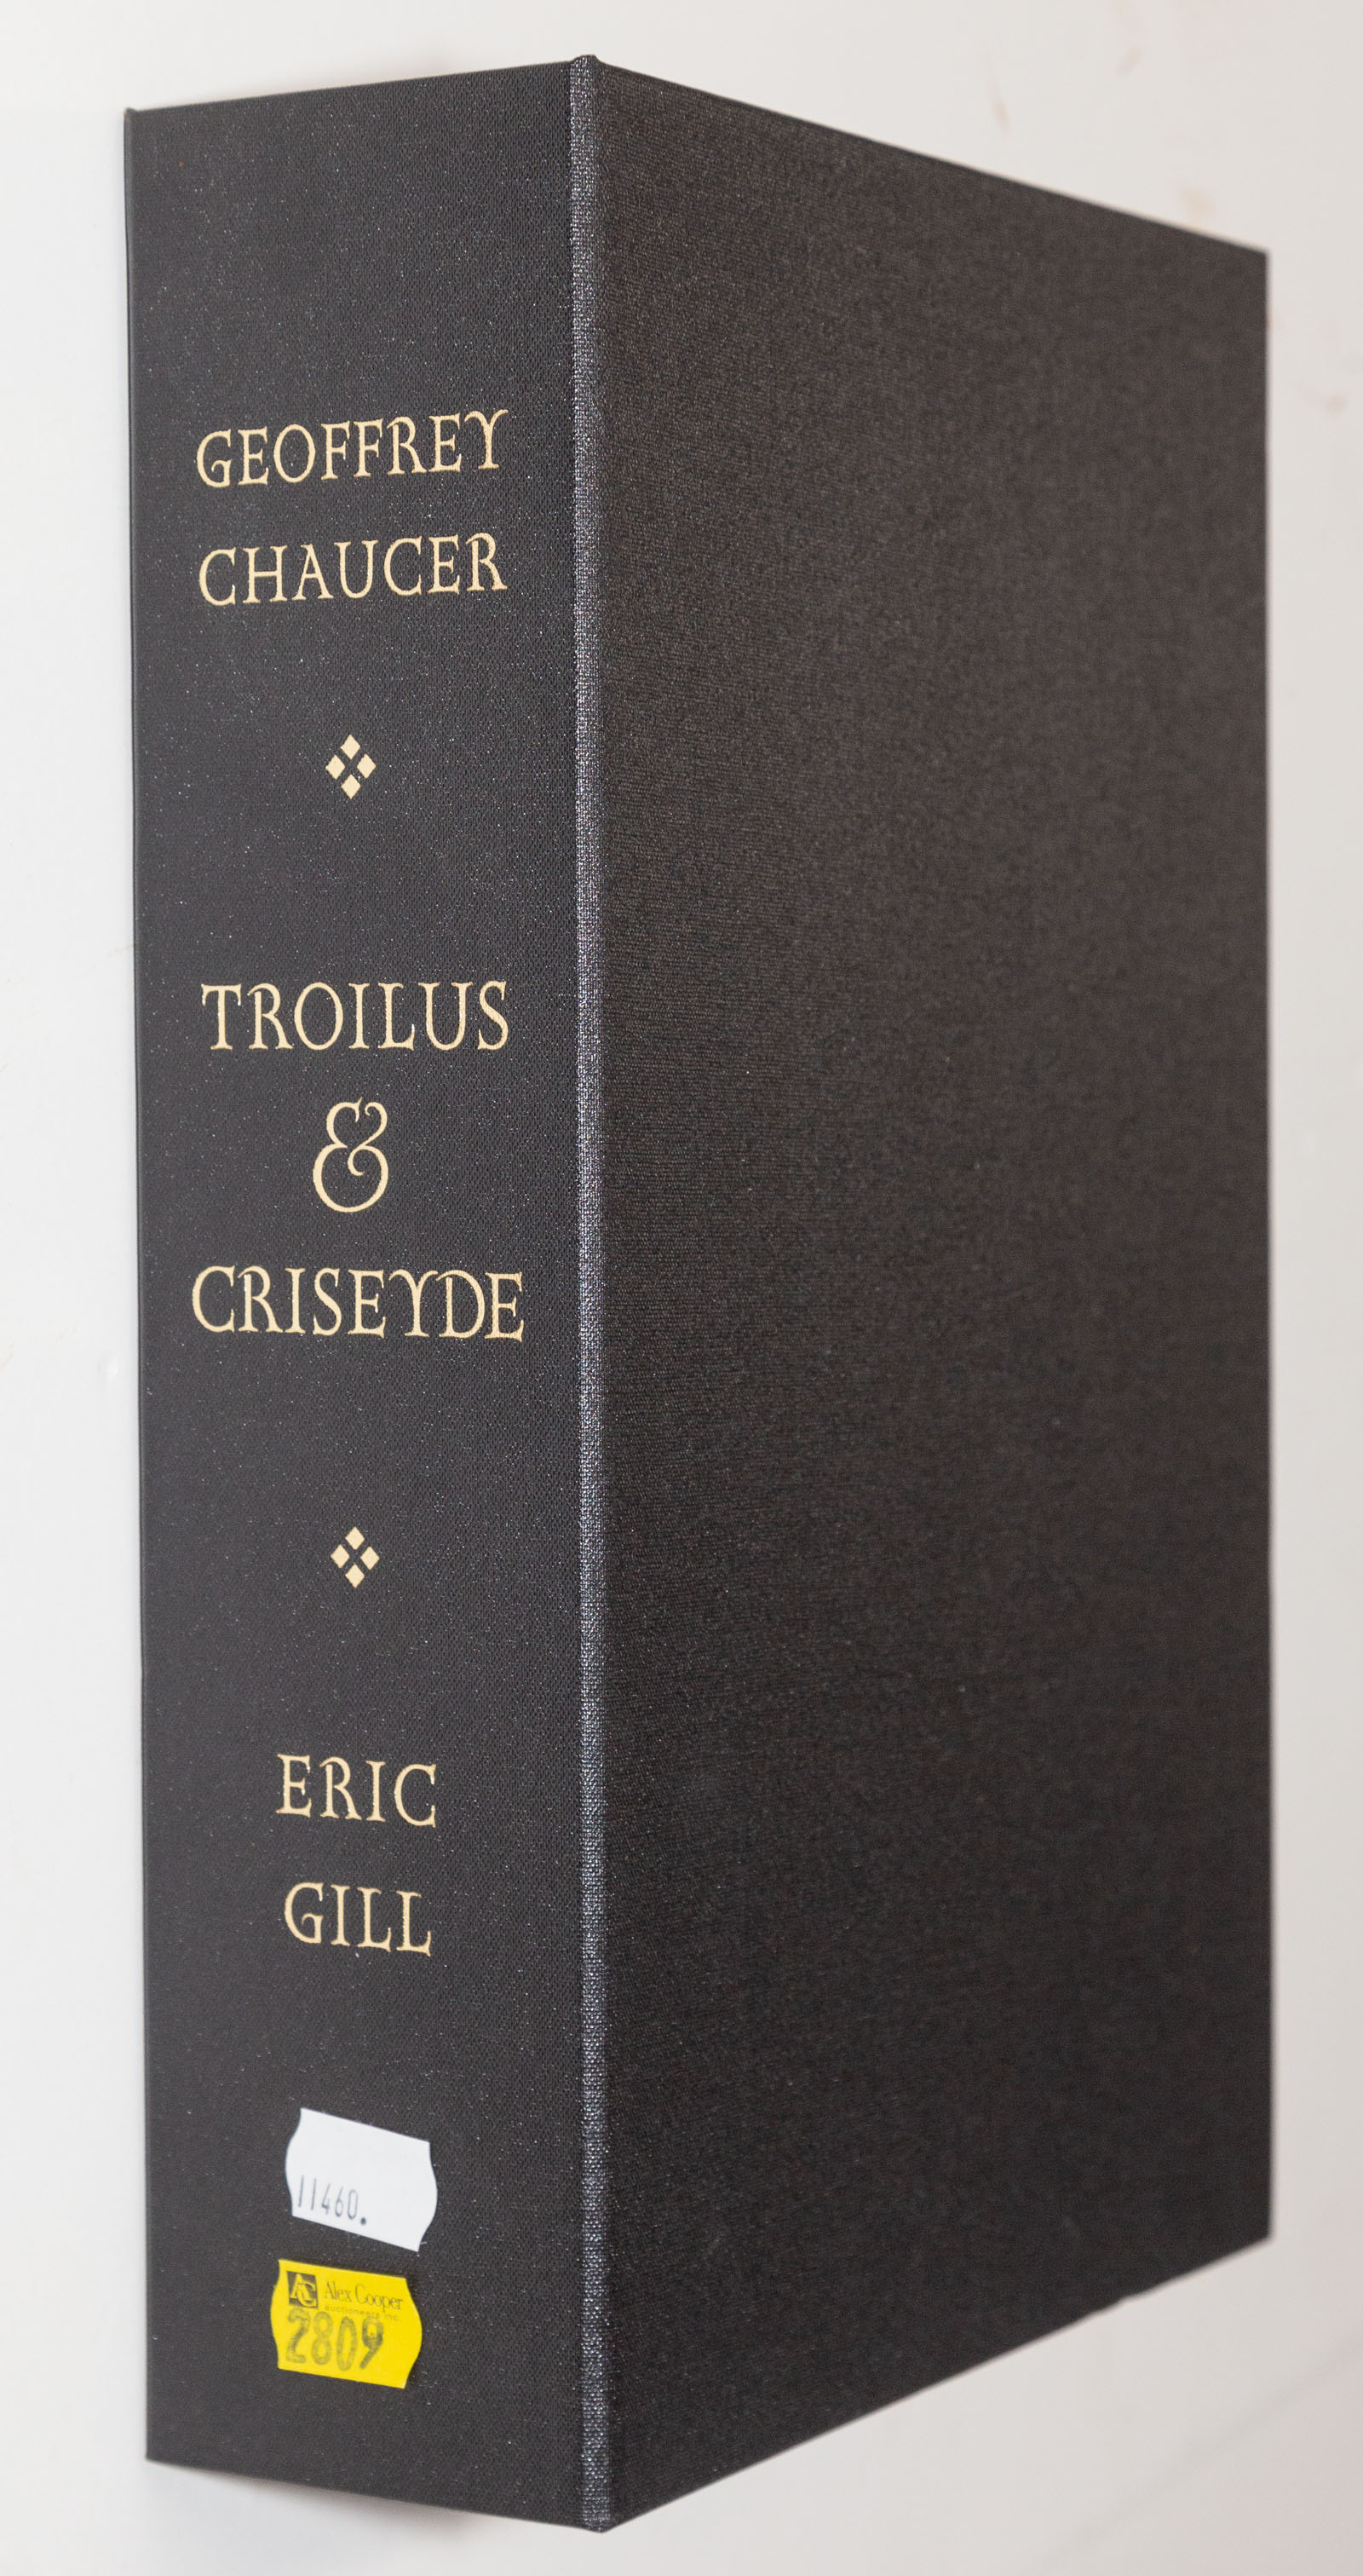 CHAUCER, TROILUS & CRISEYDE, ERIC GILL